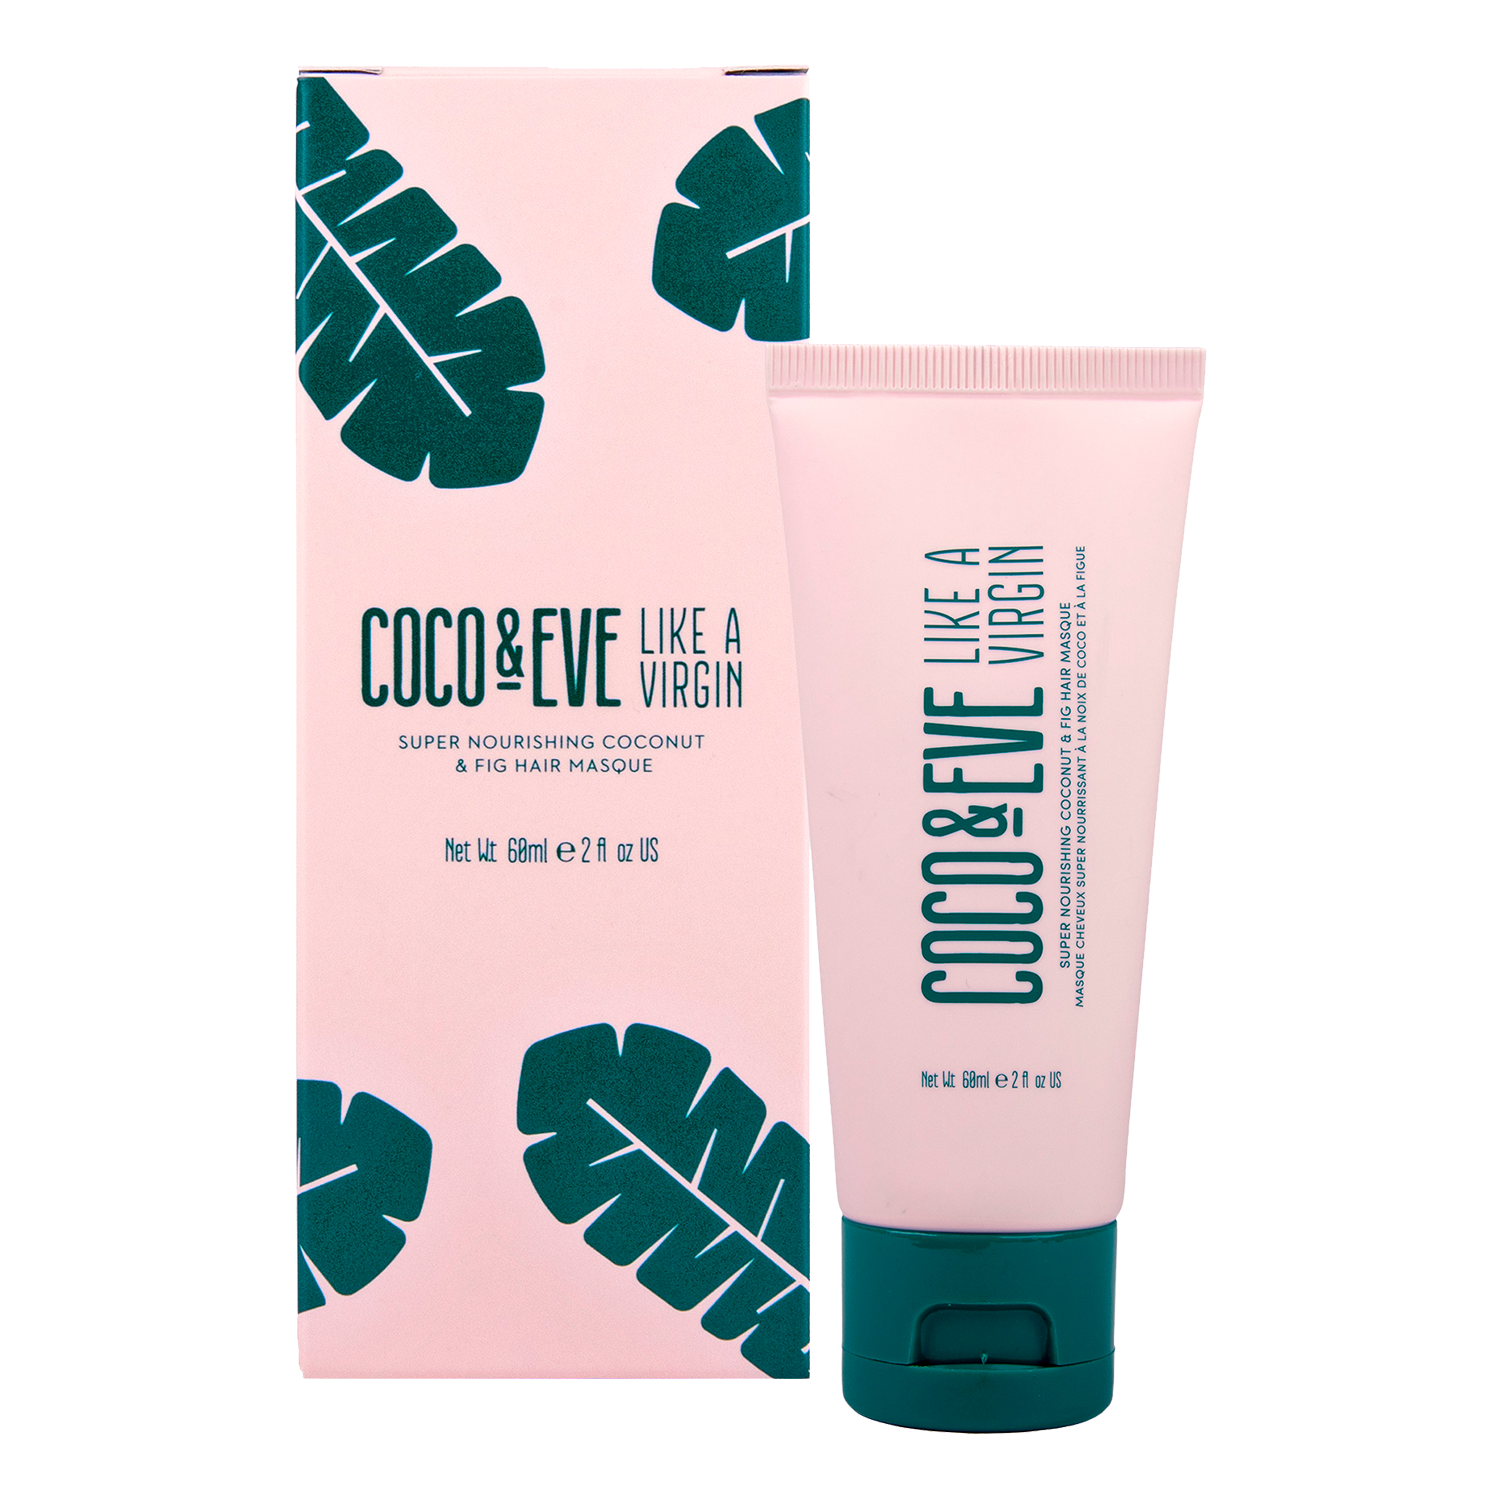 Coco & Eve Travel Size - Like A Virgin Super Nourishing Coconut & Fig Hair Masque  1